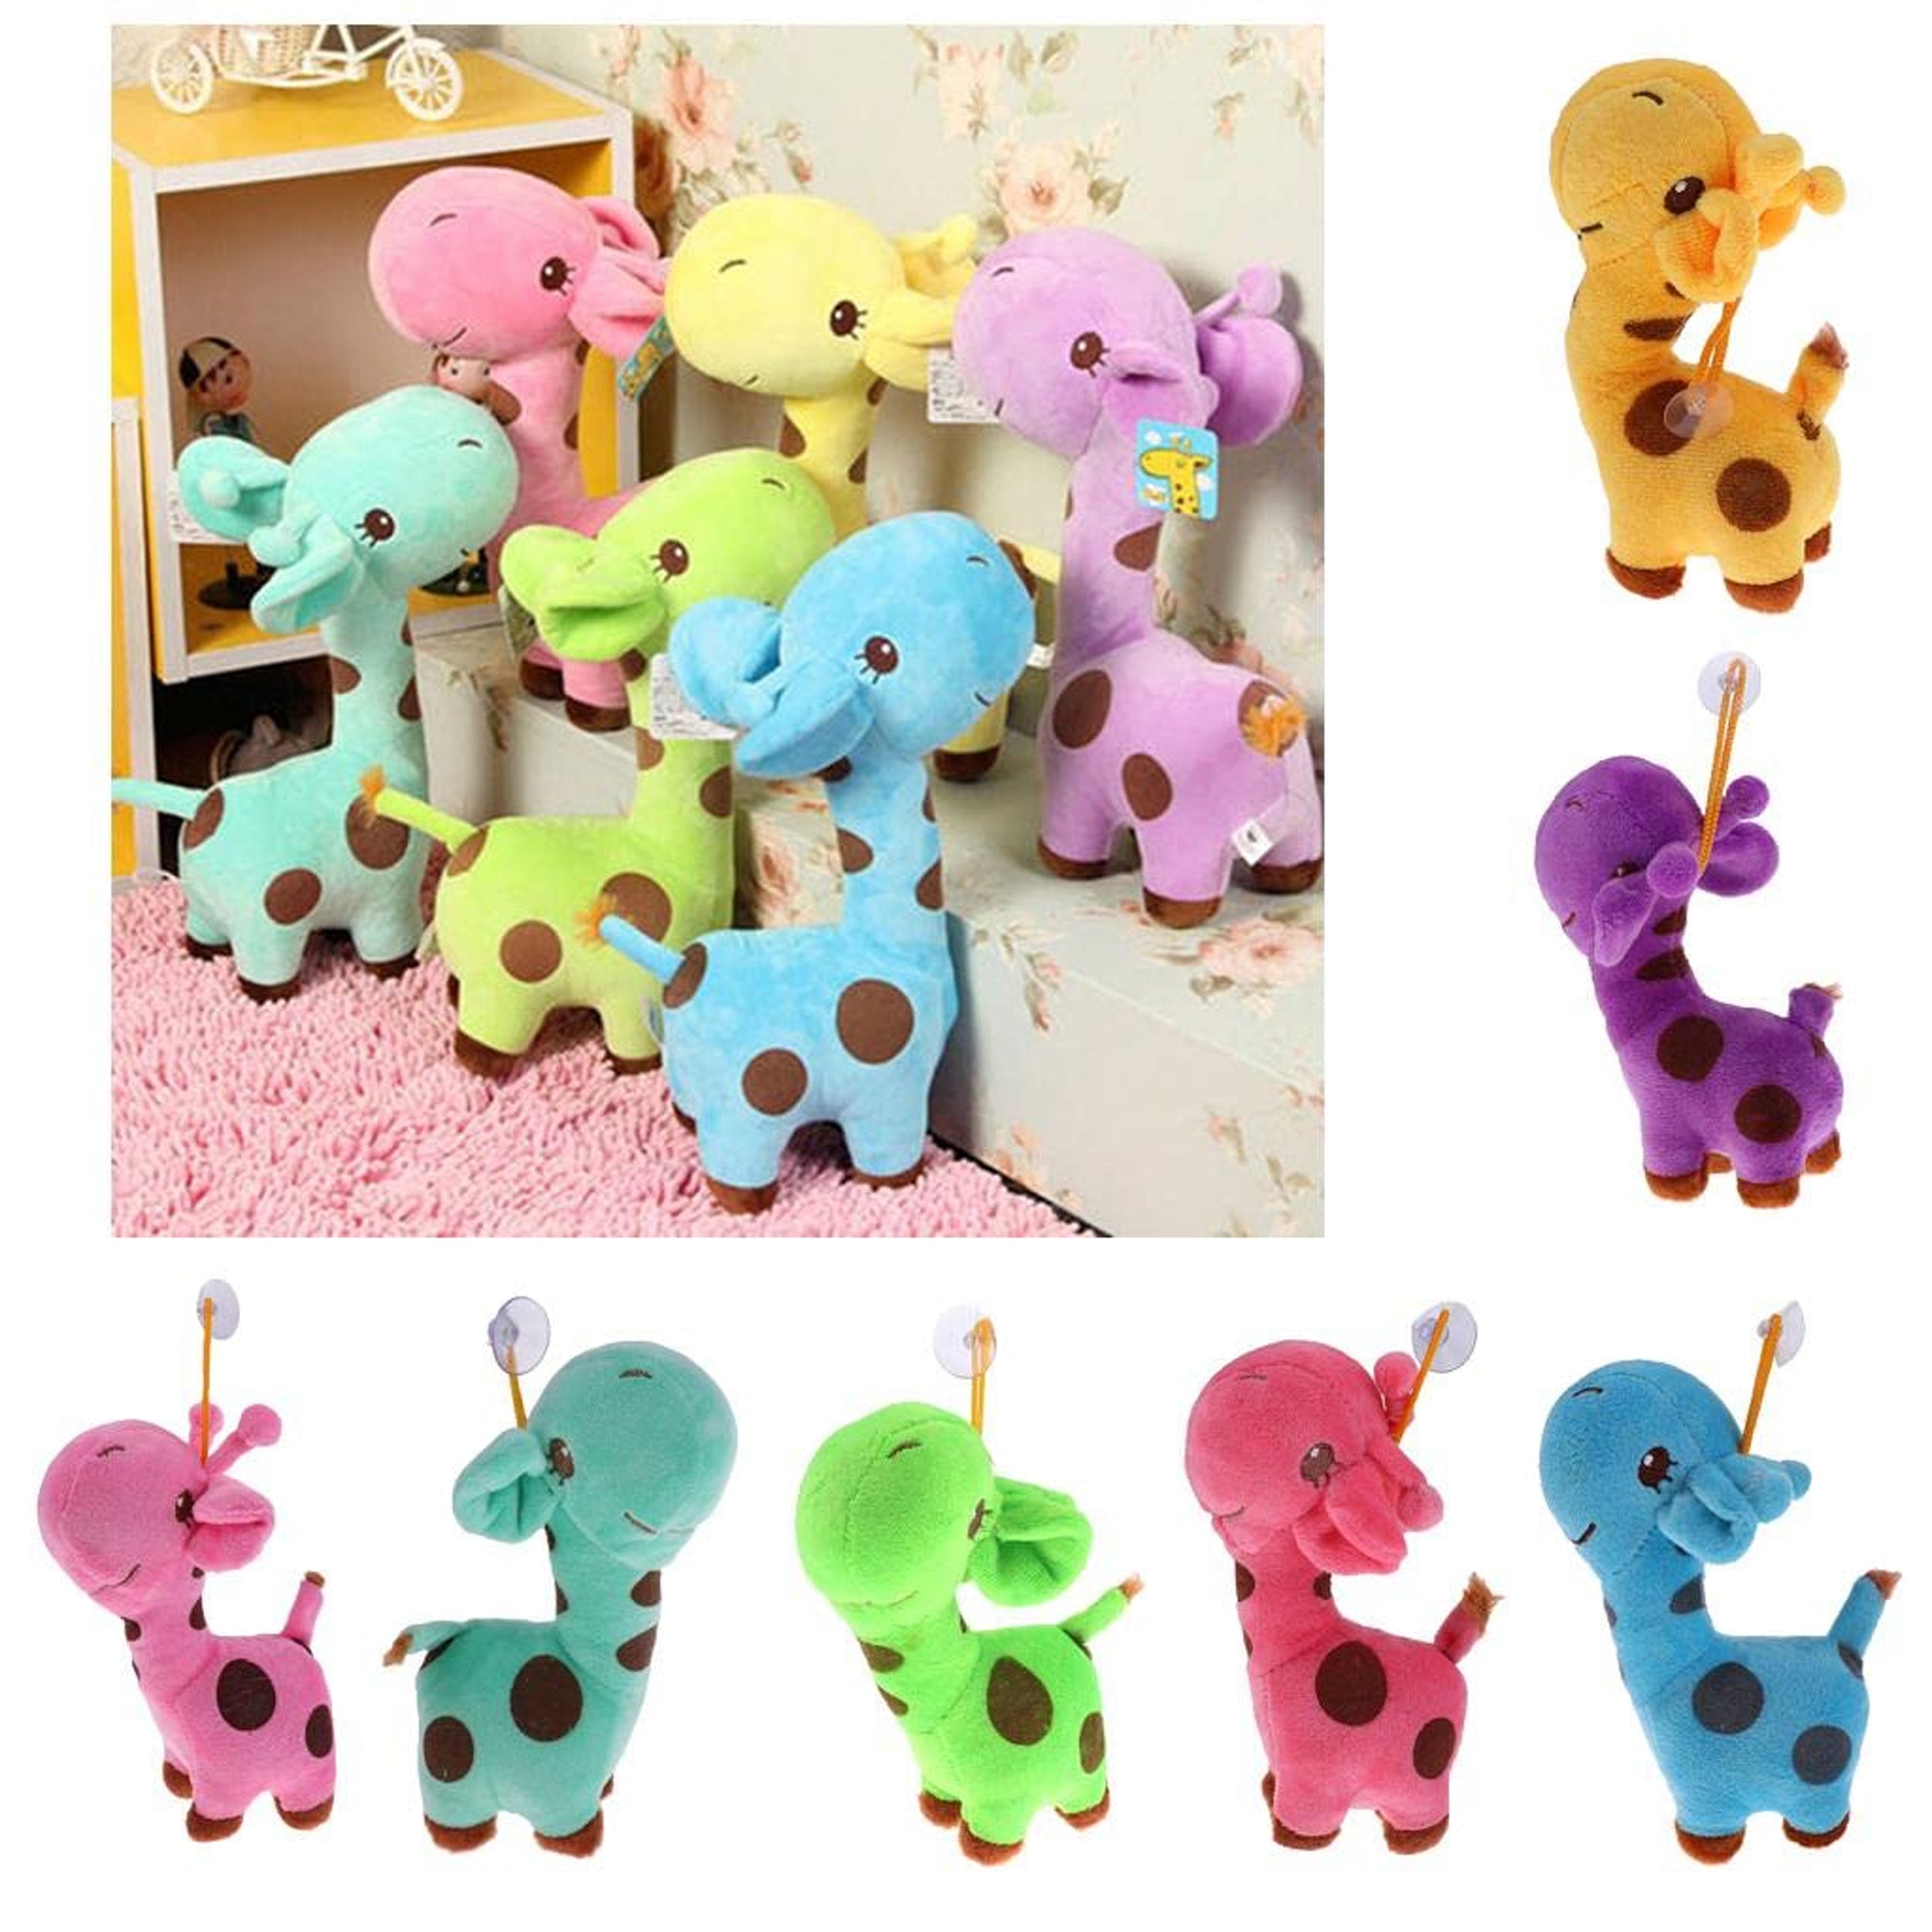 Adorable Soft Mini Giraffe Baby Plush Pendant and Keychains for Kids